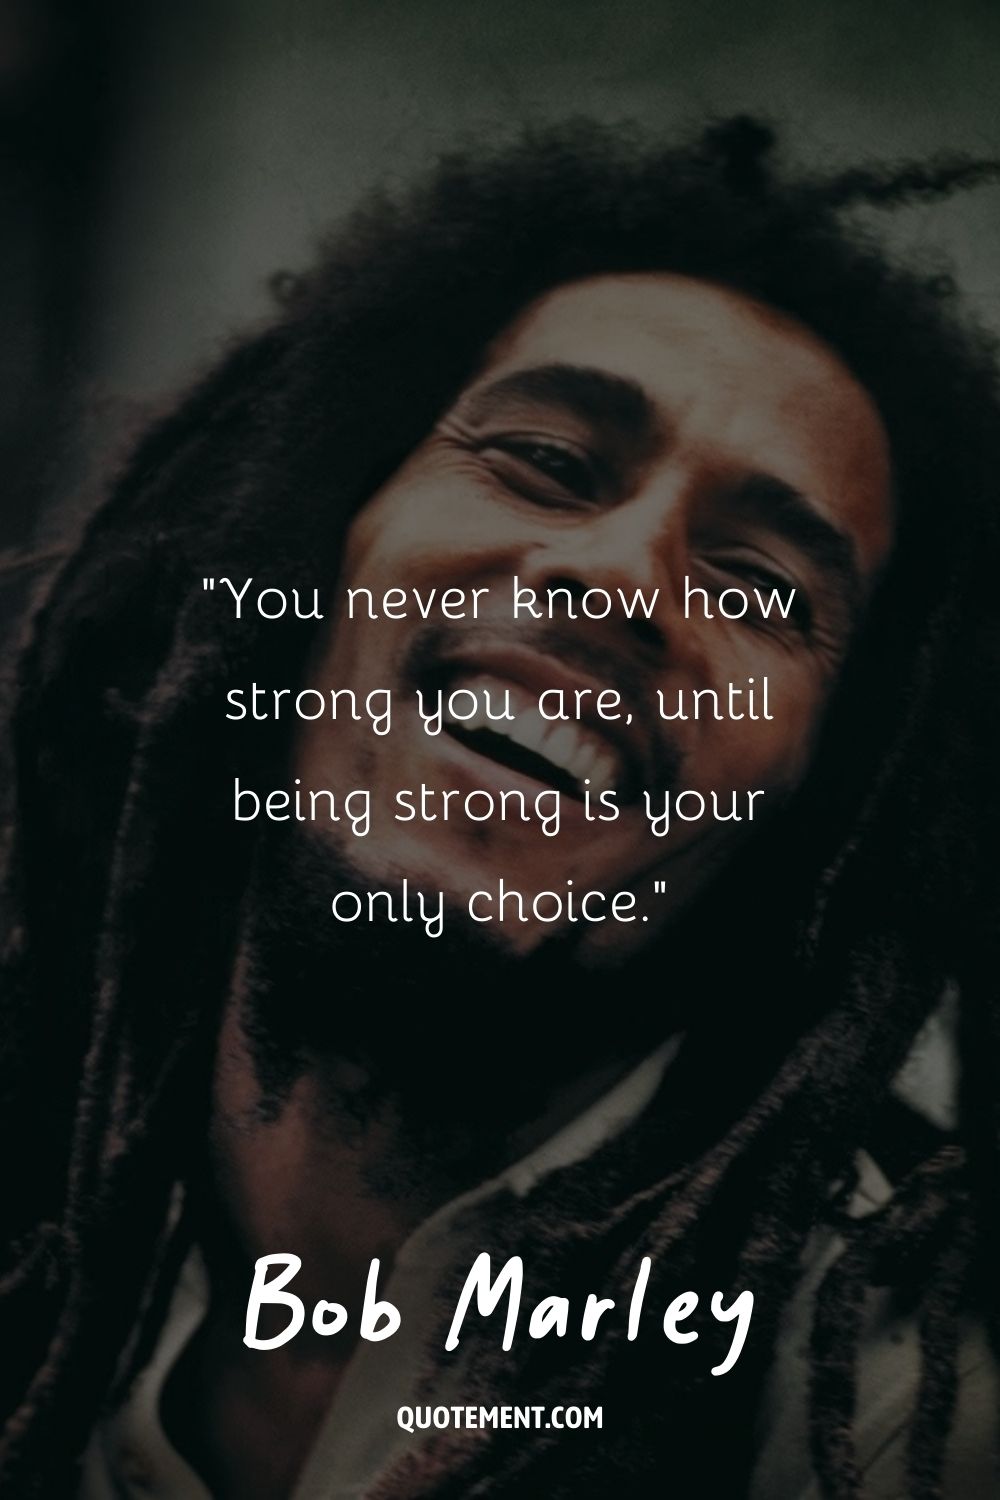 Bob Marley leaning back with a smile representing the best Bob Marley quote